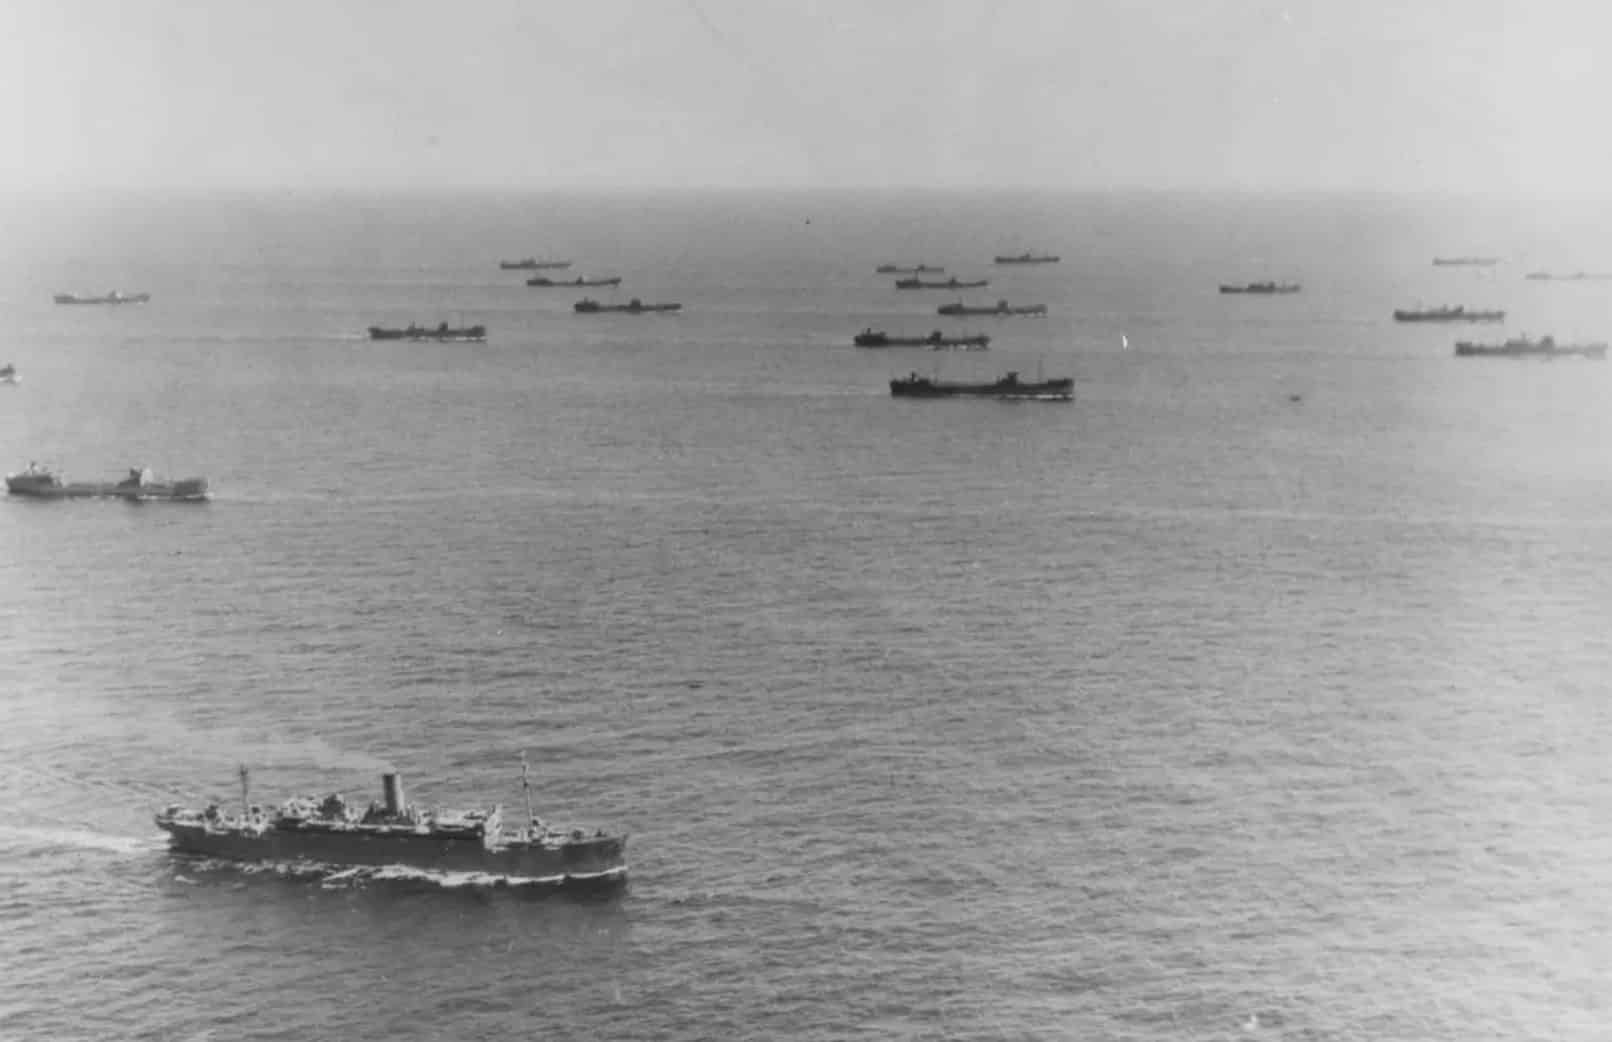 Convoys and Bombers at world war 2